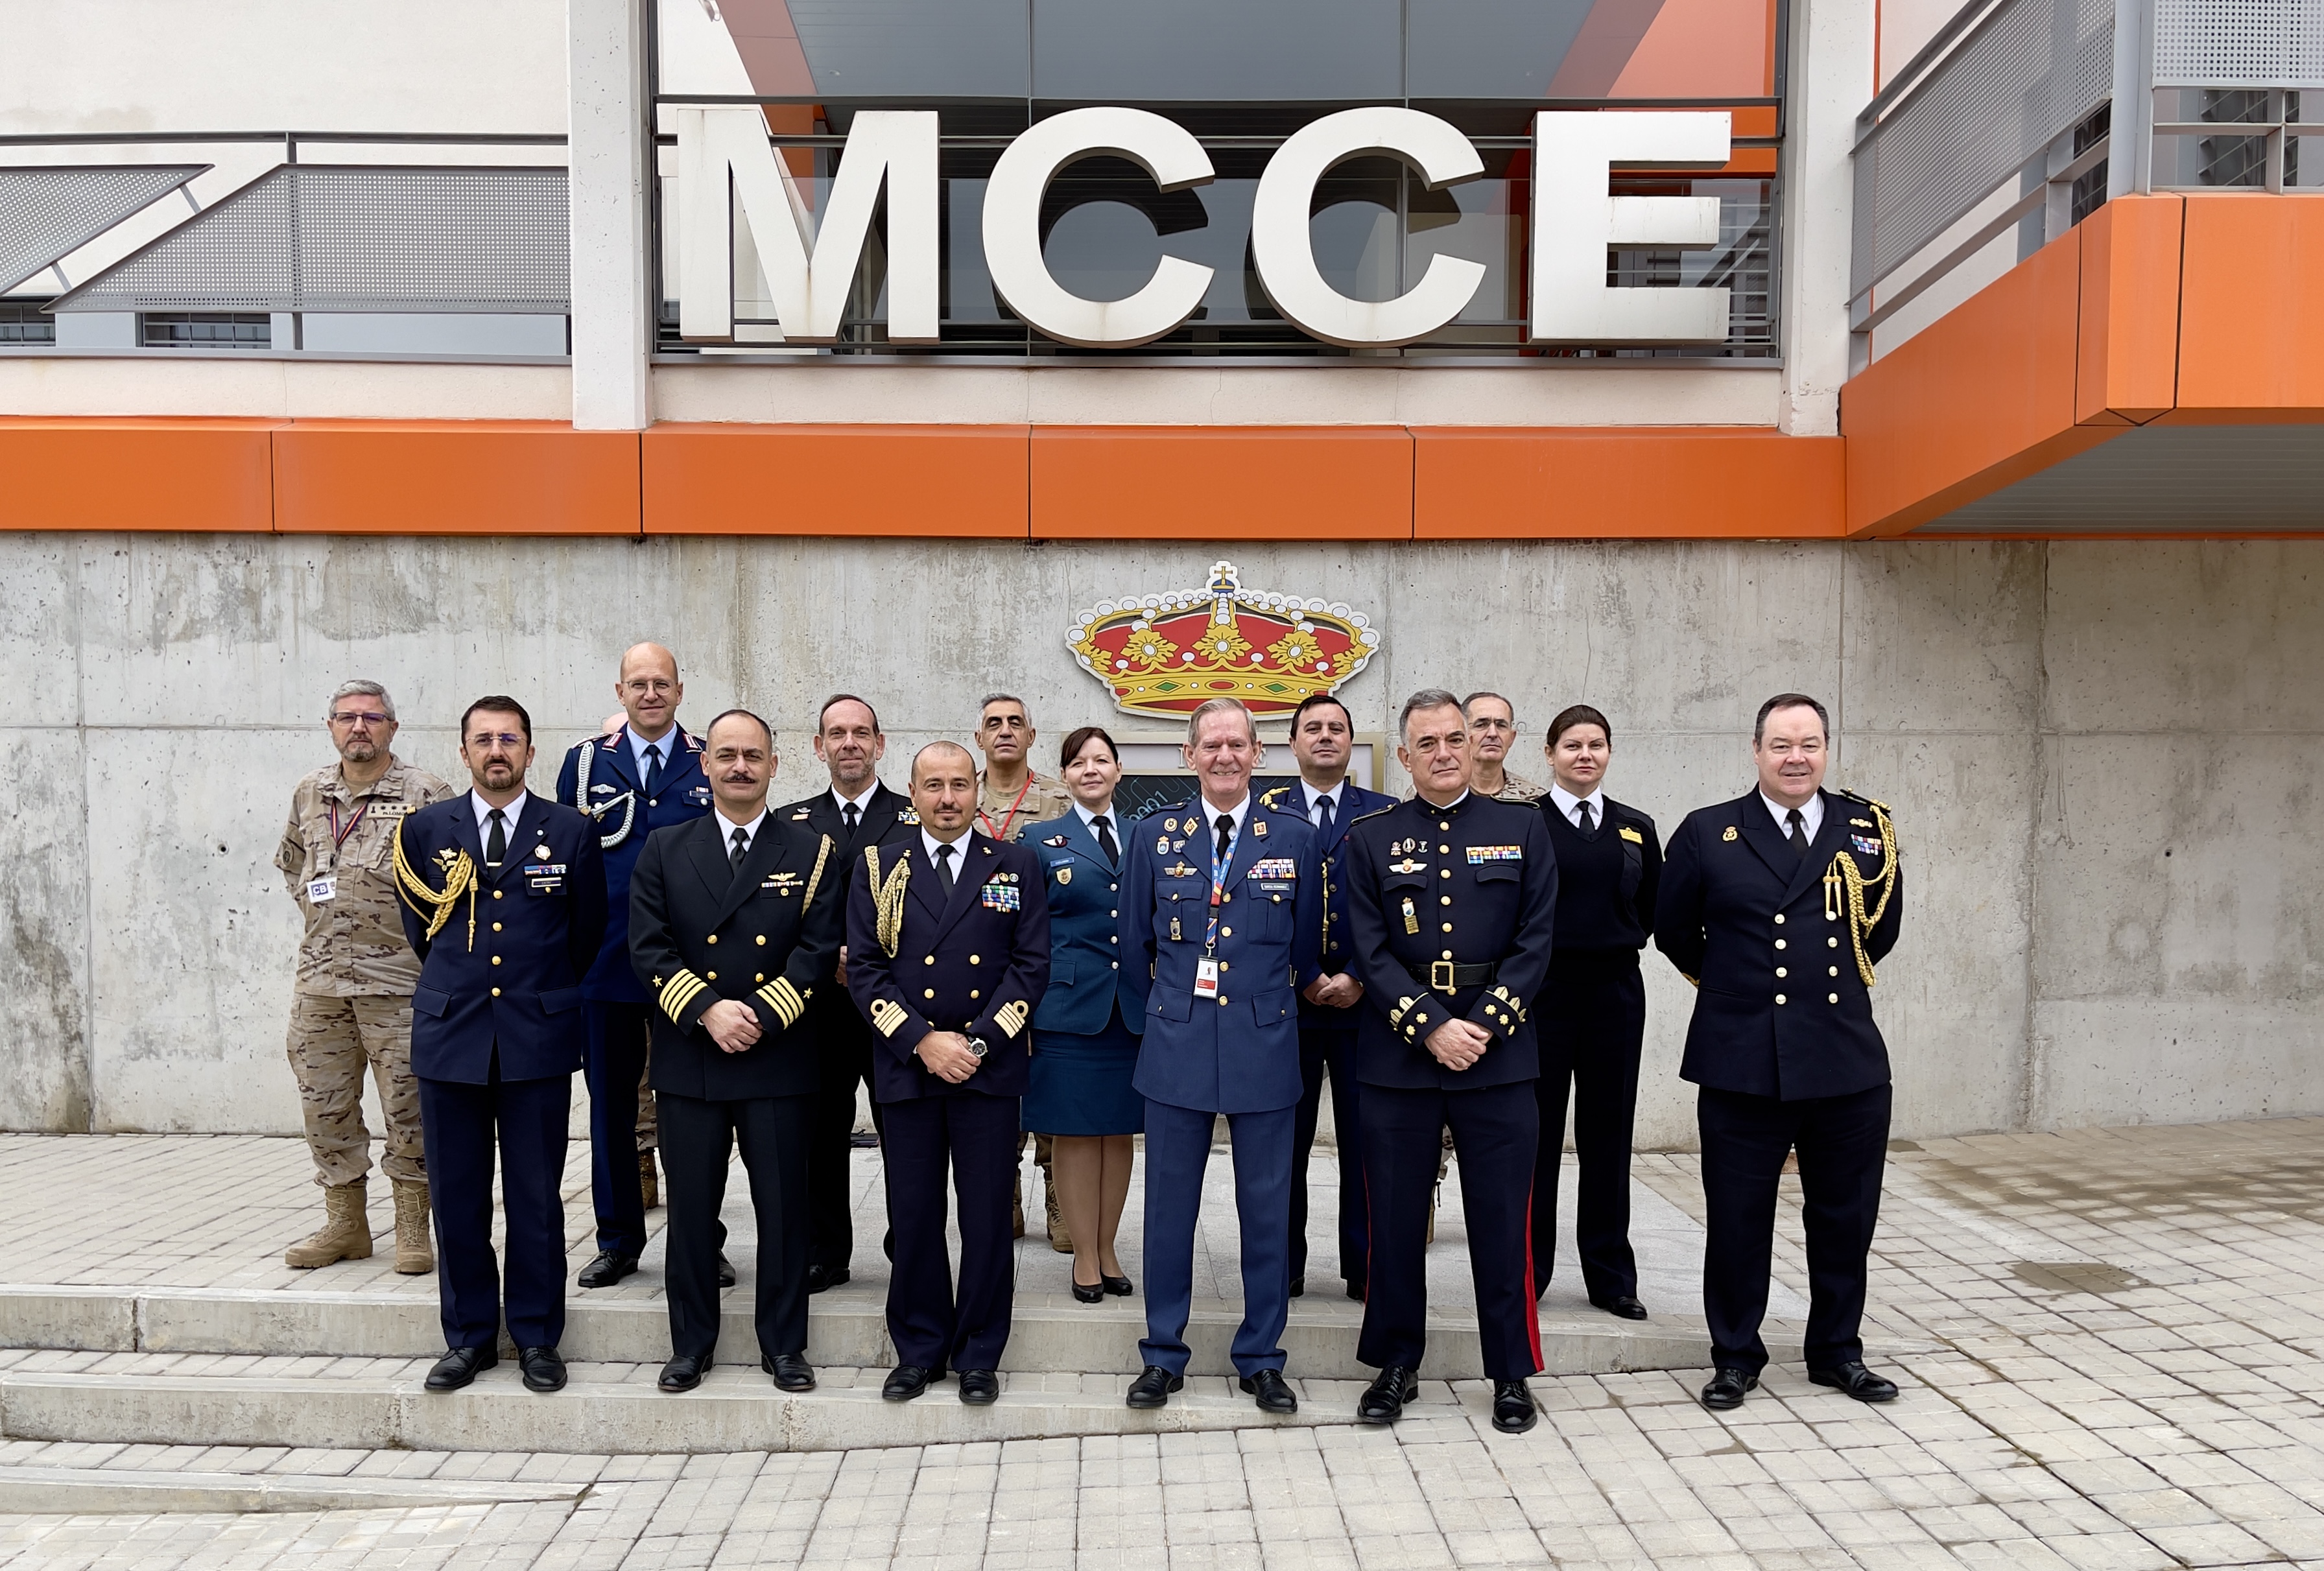 Attachés from NATO countries with MCCE personnel.